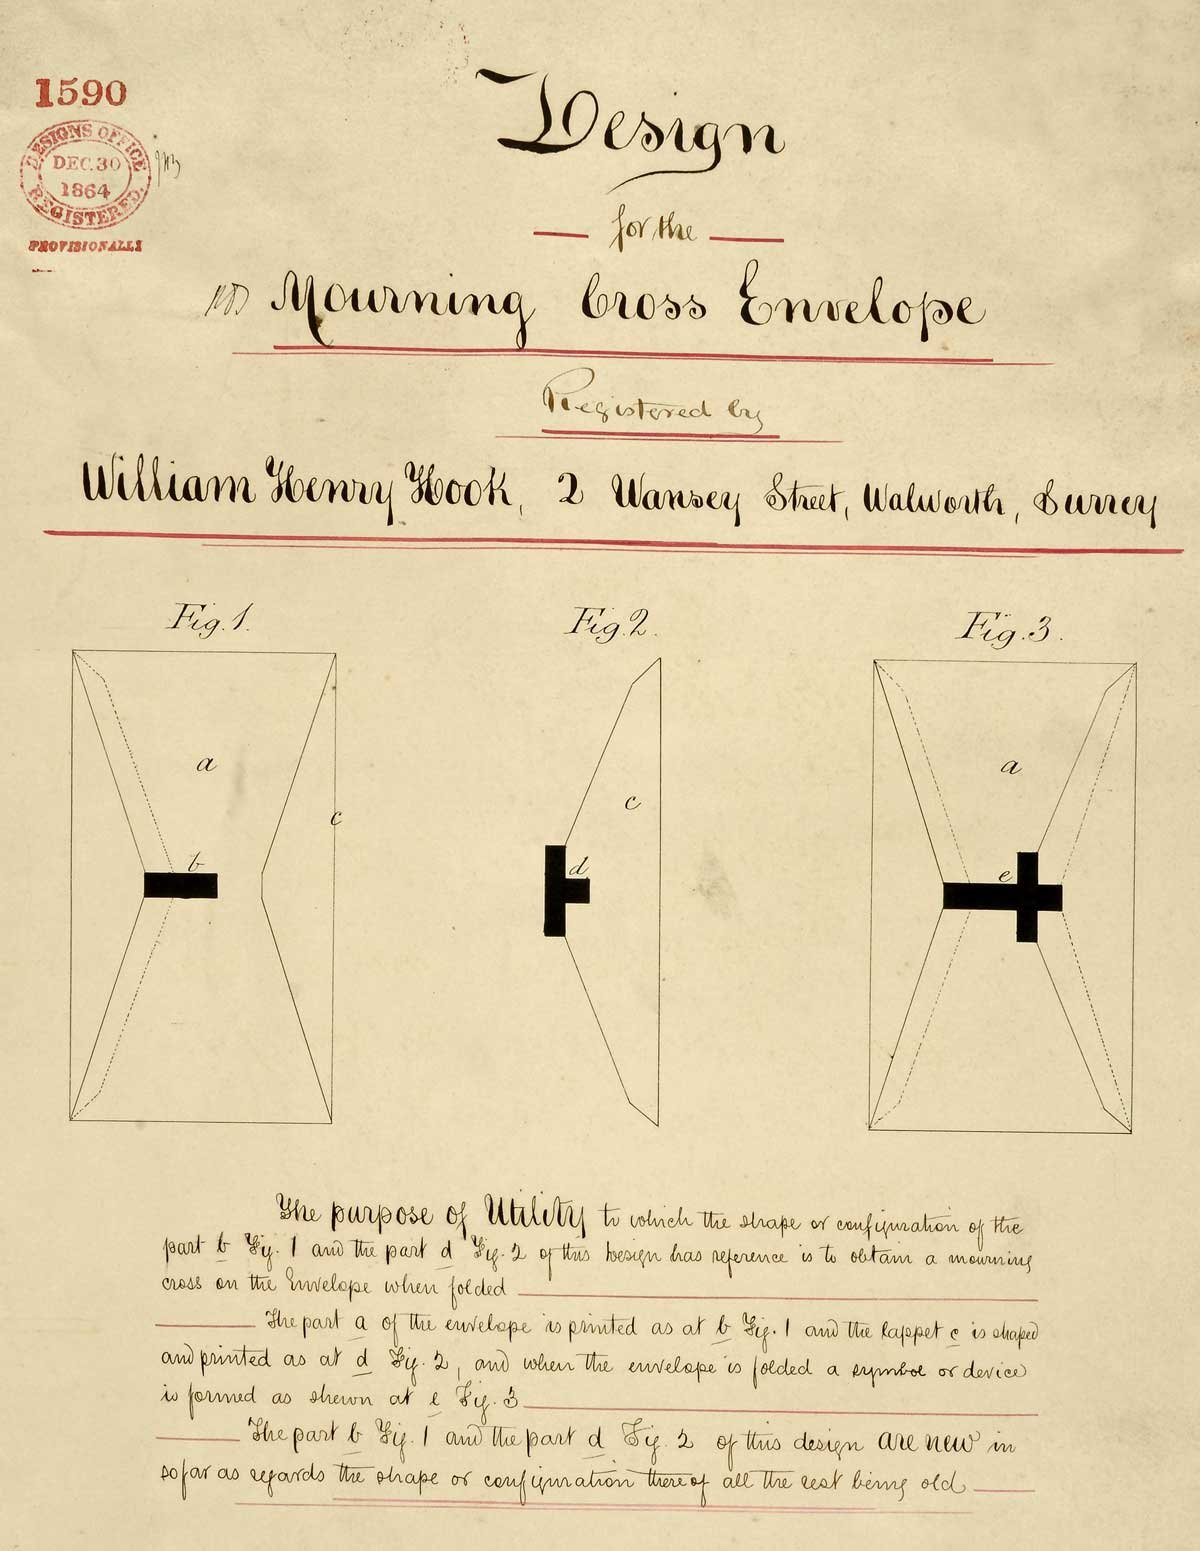 A title, explanatory text and three figures show exactly how The Mourning Cross envelope works.